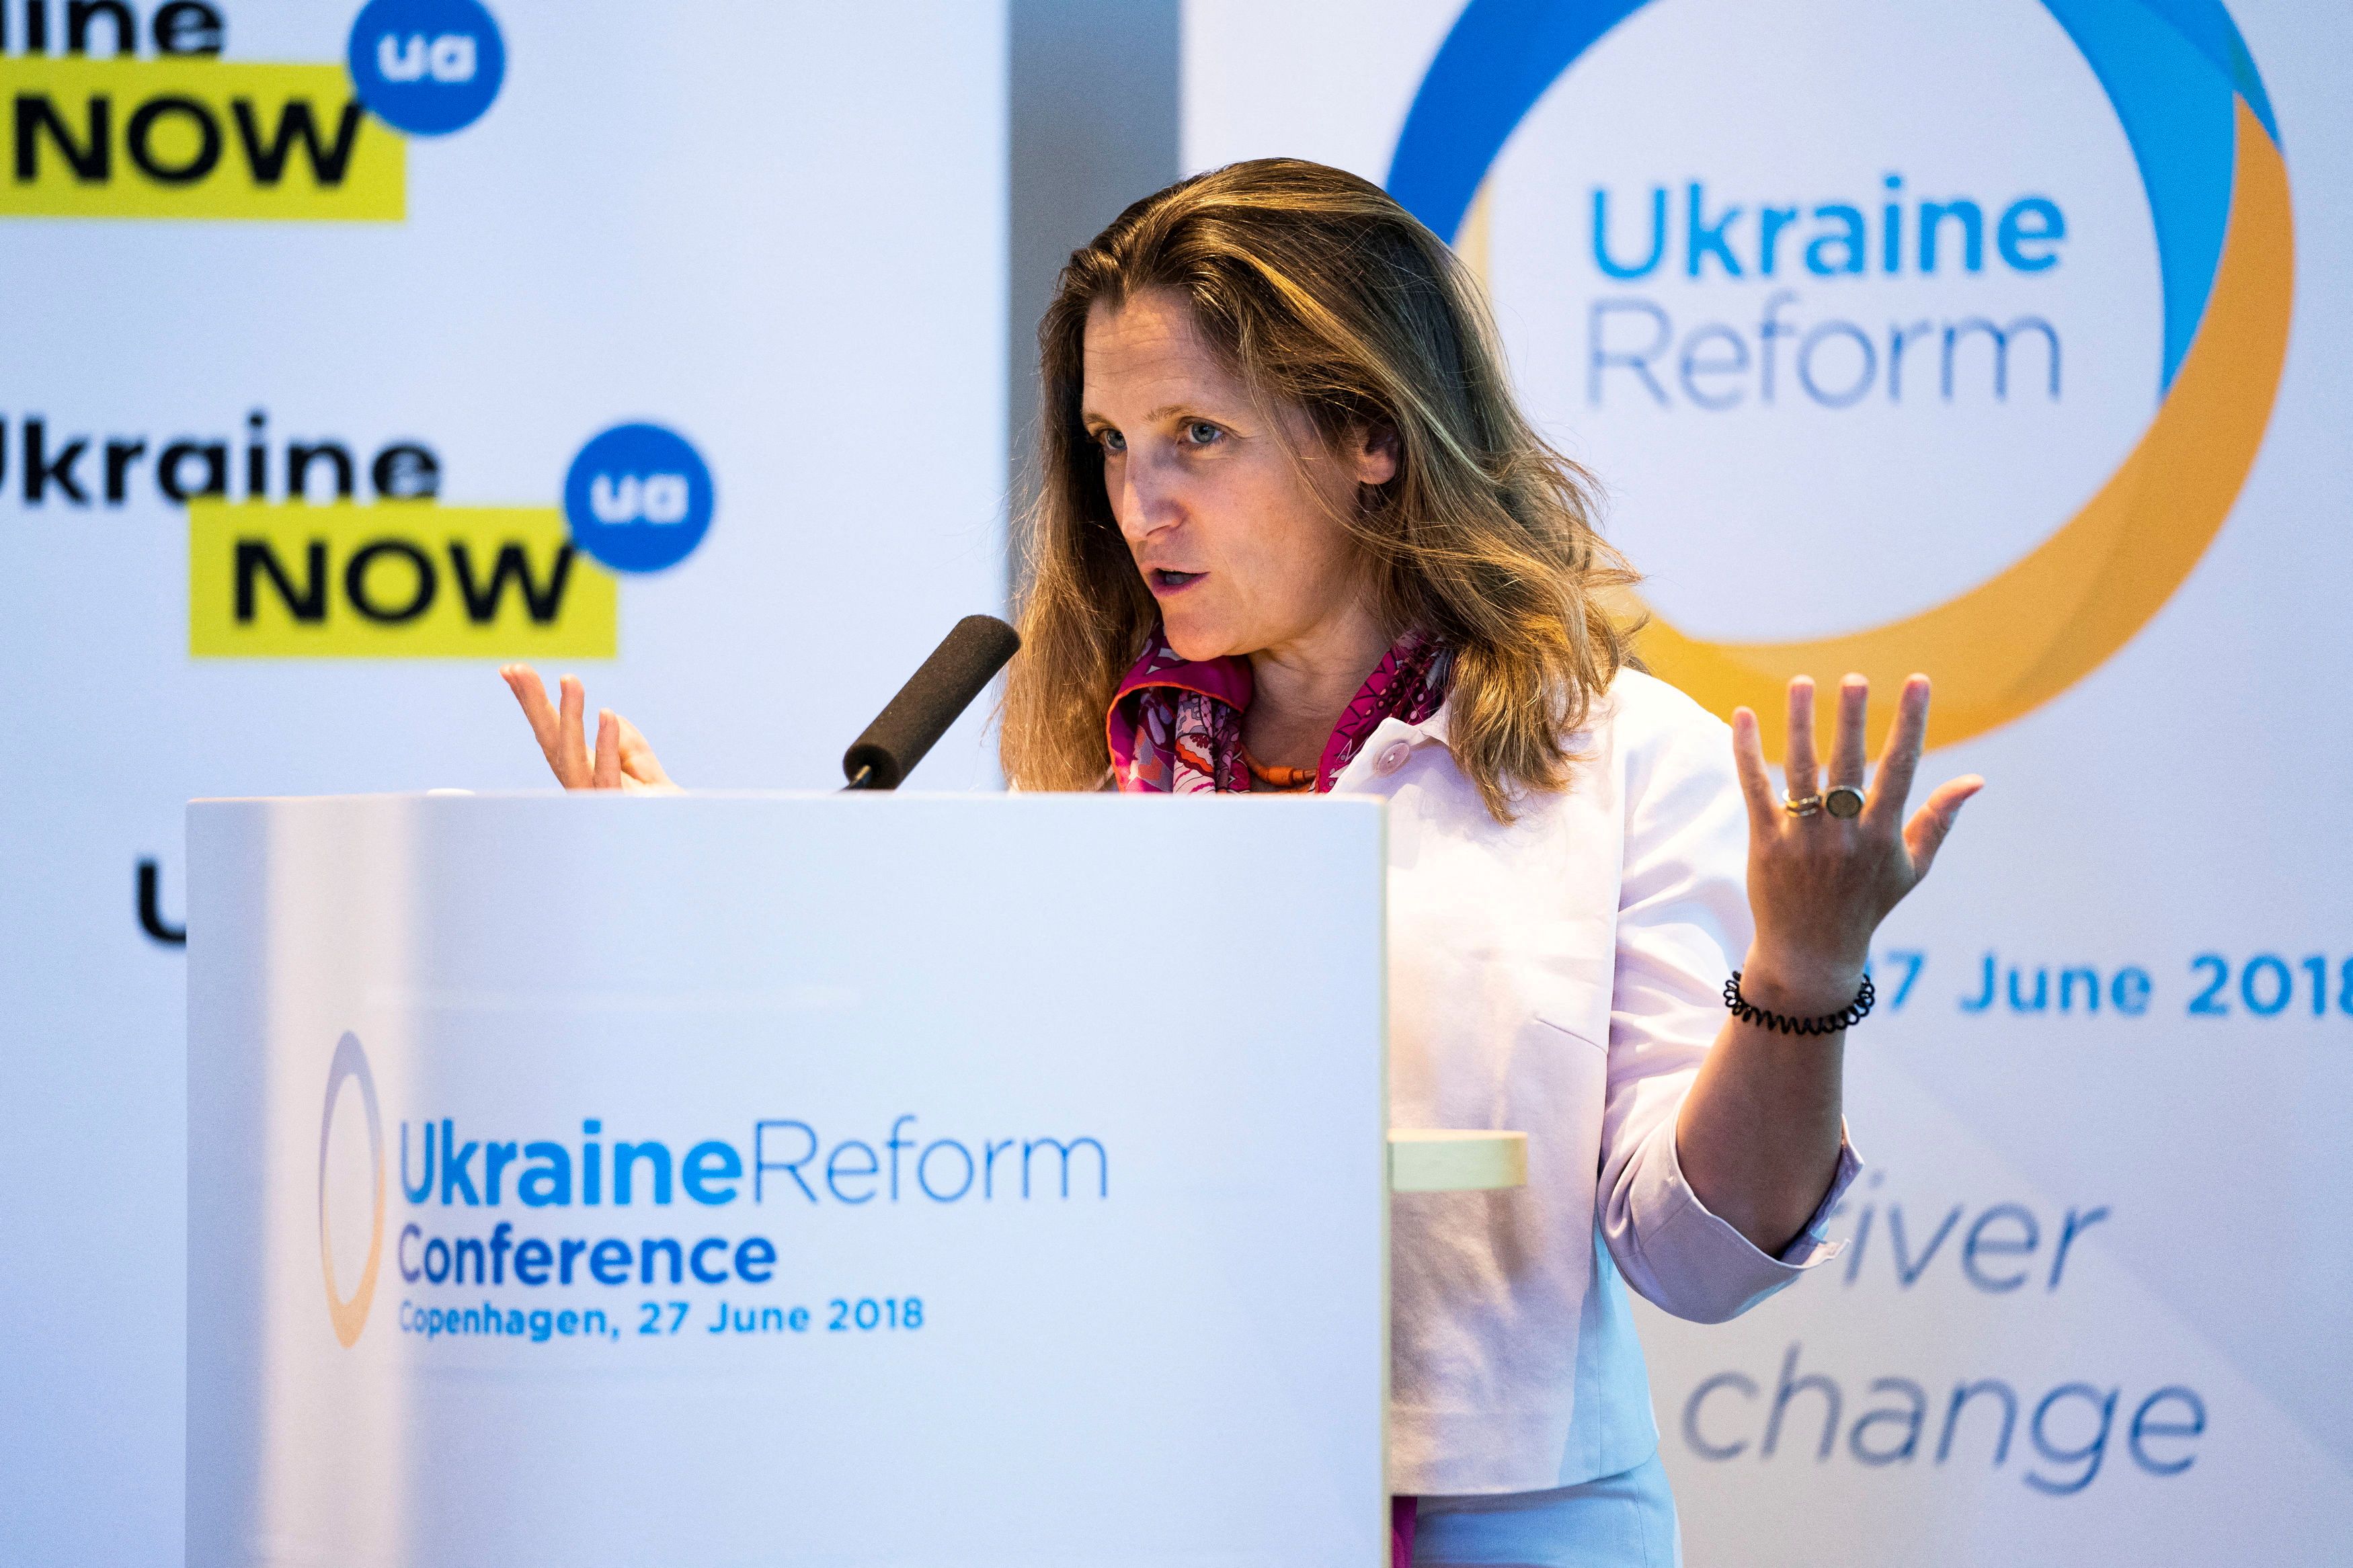 Canada's Foreign Minister Chrystia Freeland speaks during the international Ukraine Reform Conference in Copenhagen